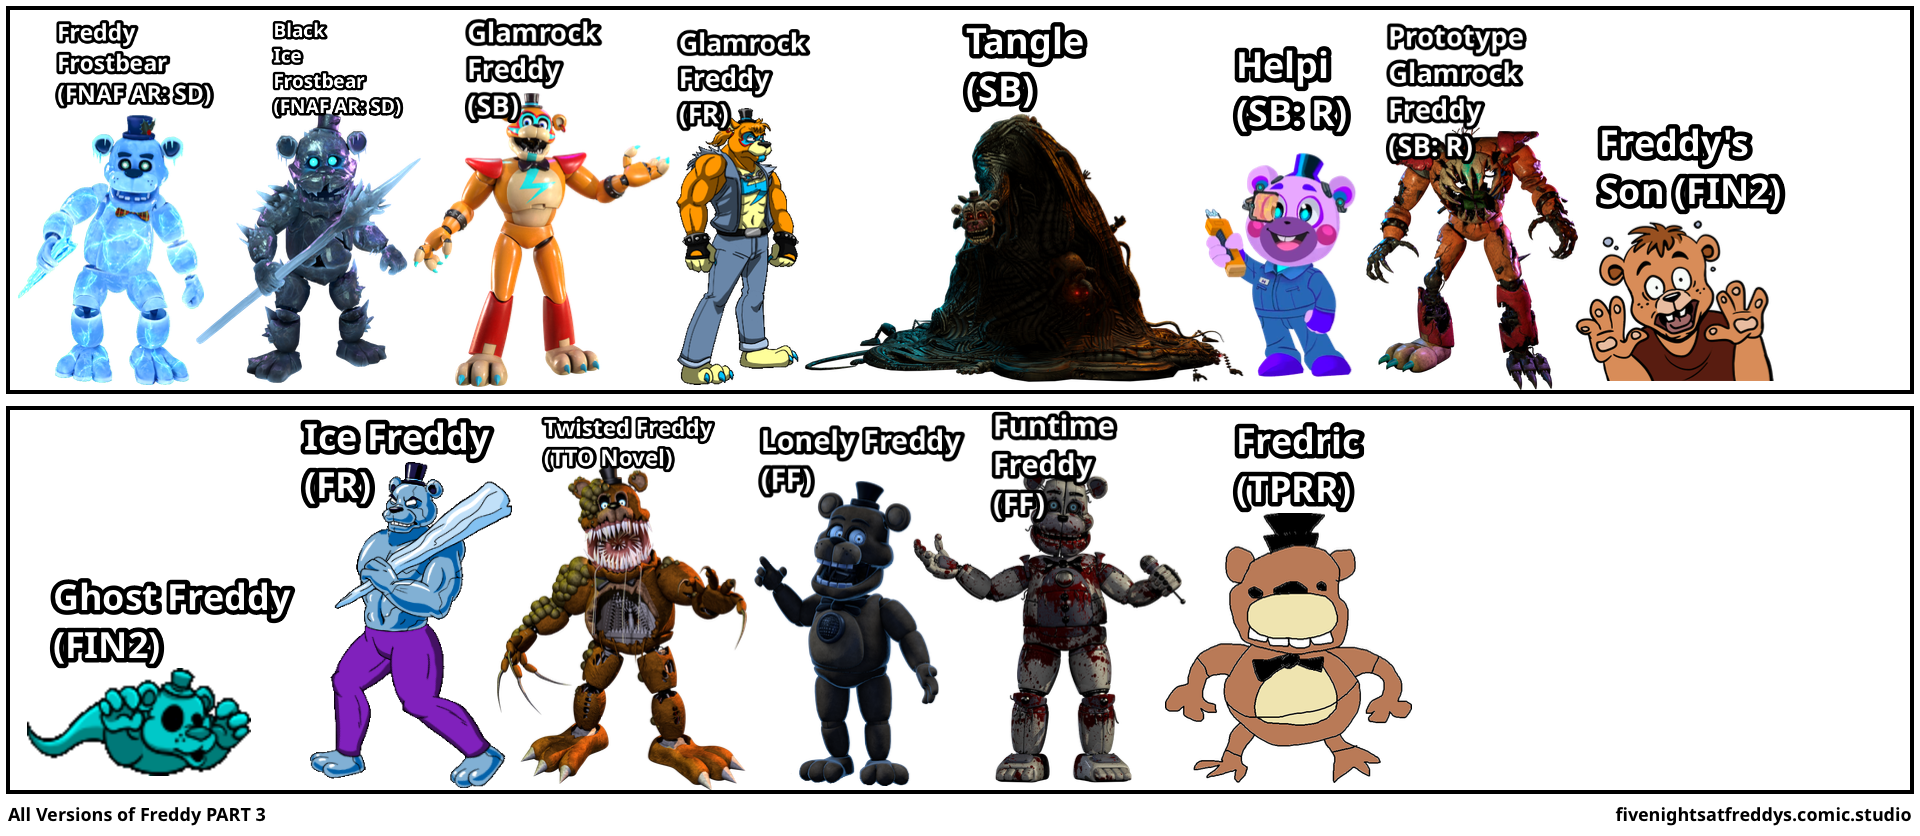 All Versions of Freddy PART 3